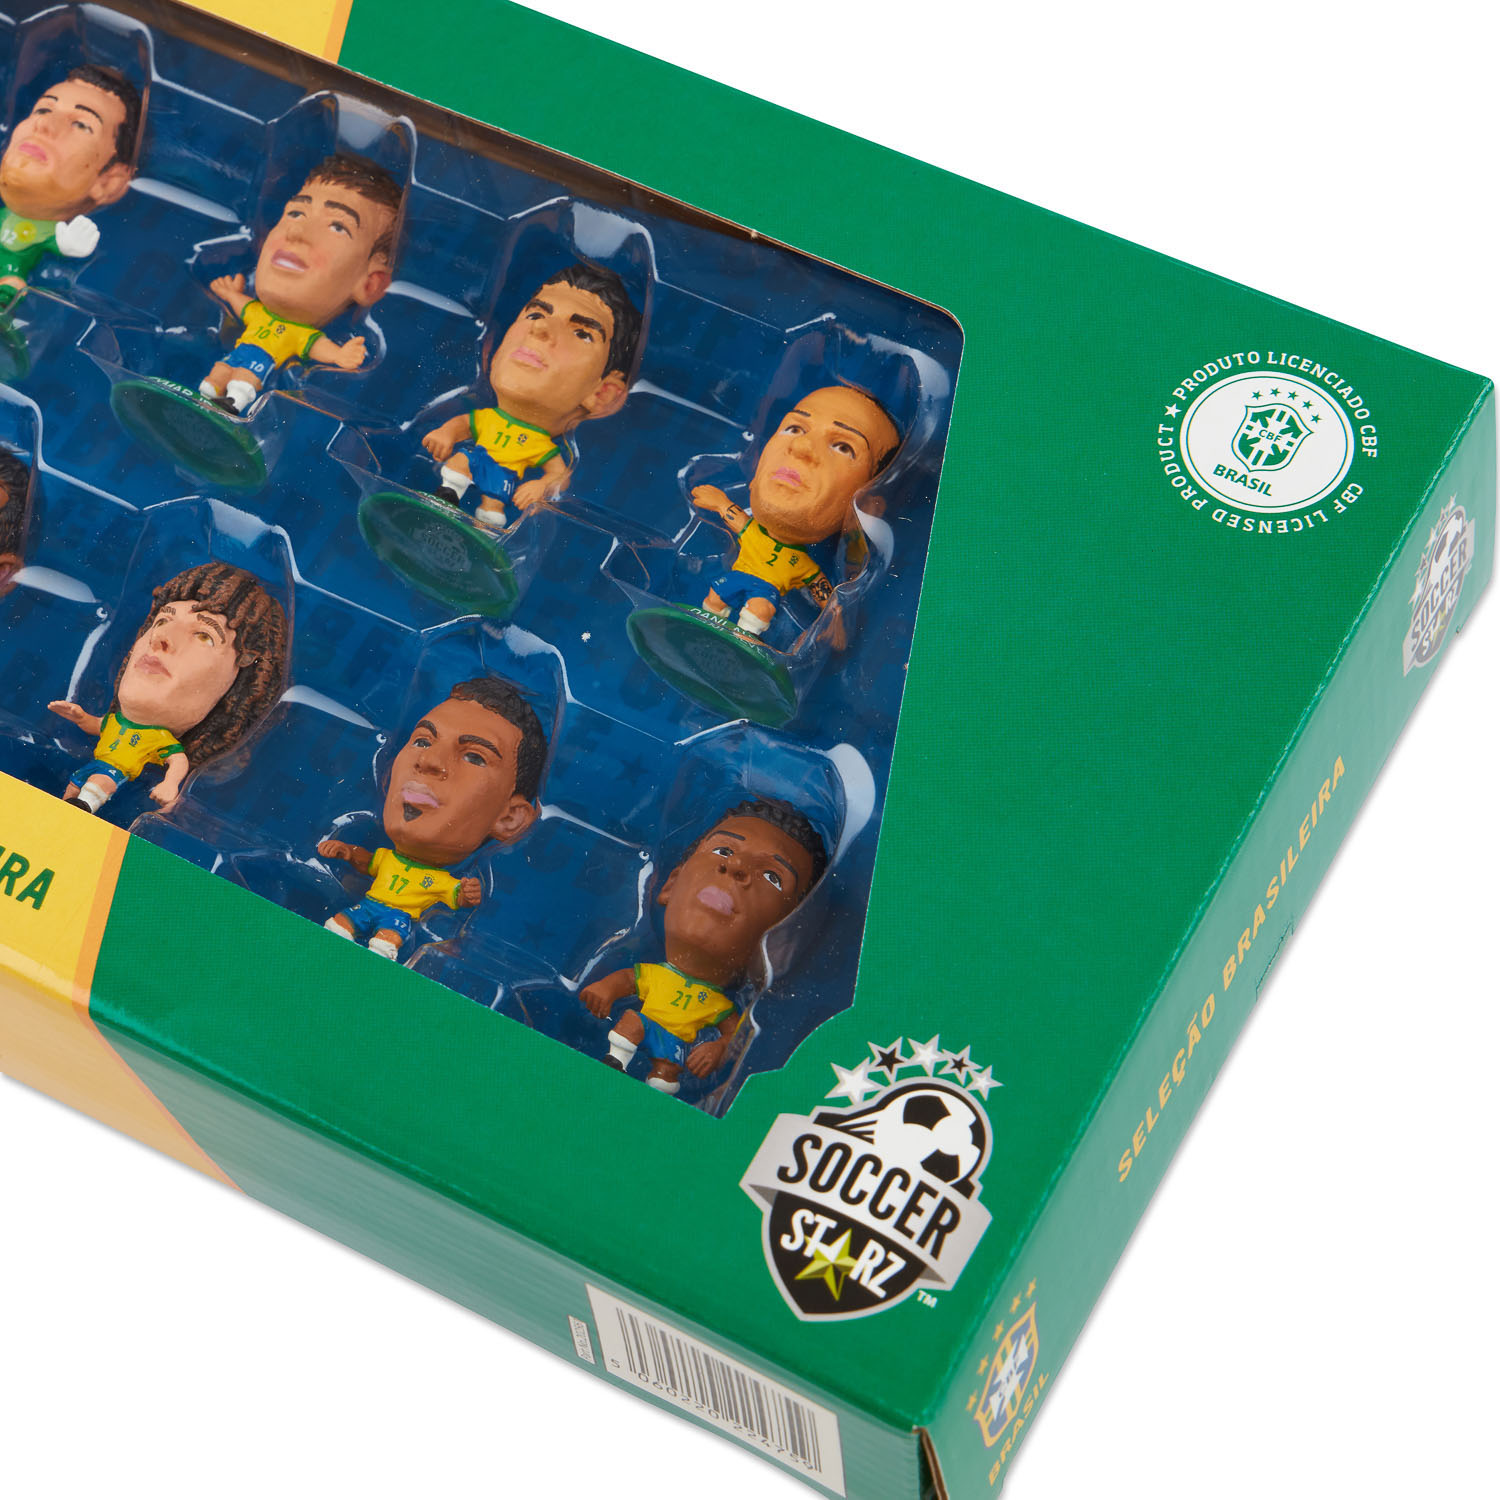 Soccer Starz Brazil 2014 Edition World Cup 15 Player Team Pack 400231